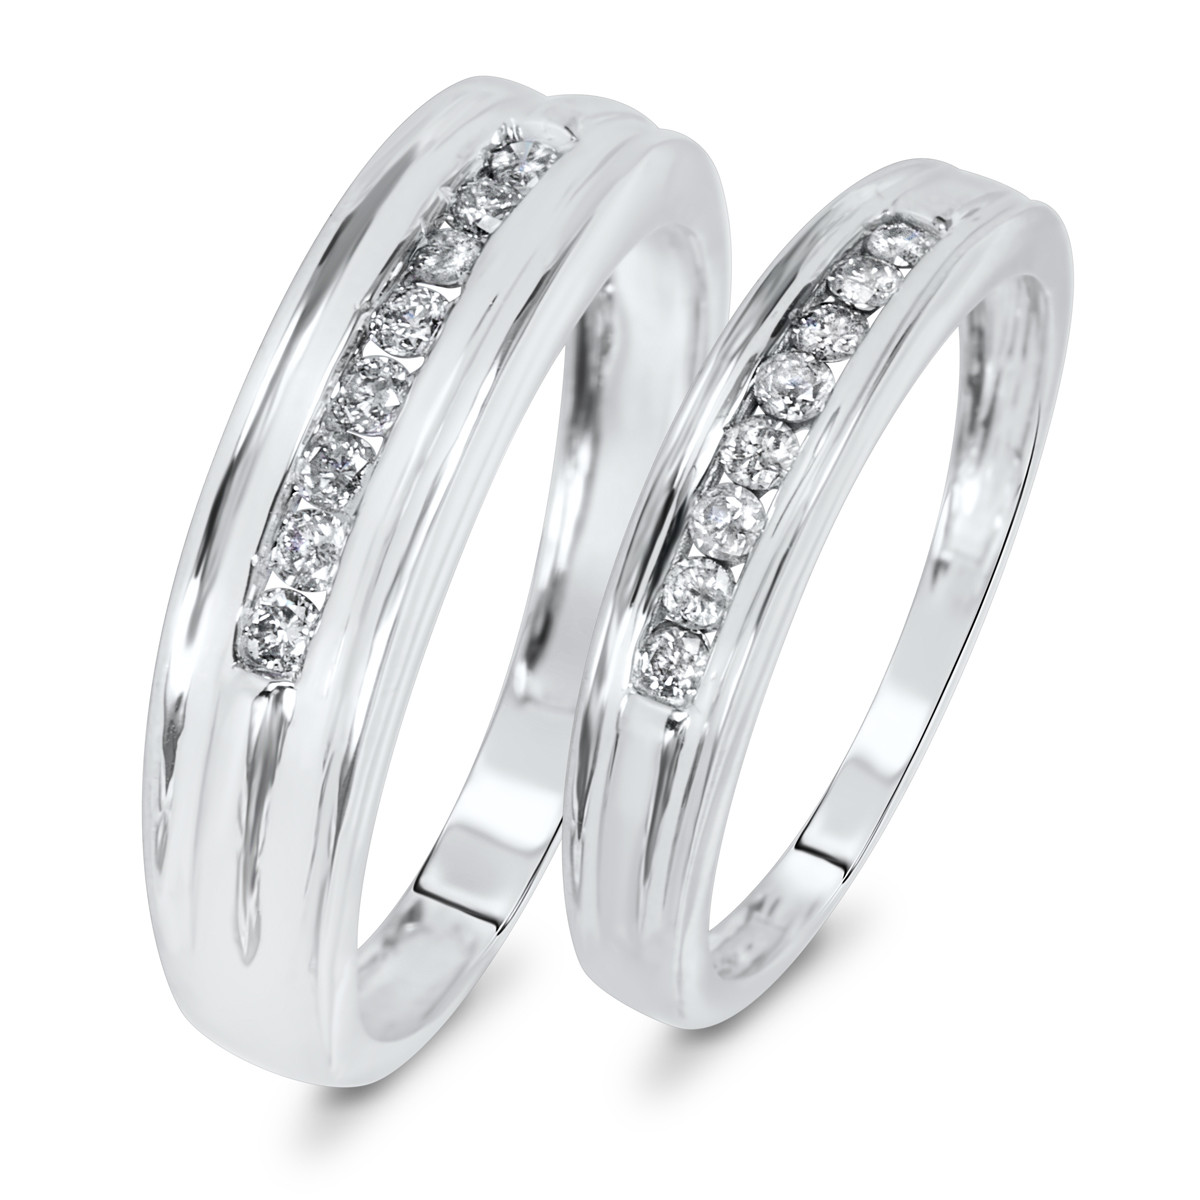 Matching Wedding Bands White Gold
 3 8 CT T W Diamond Matching Wedding Band Set 10K White